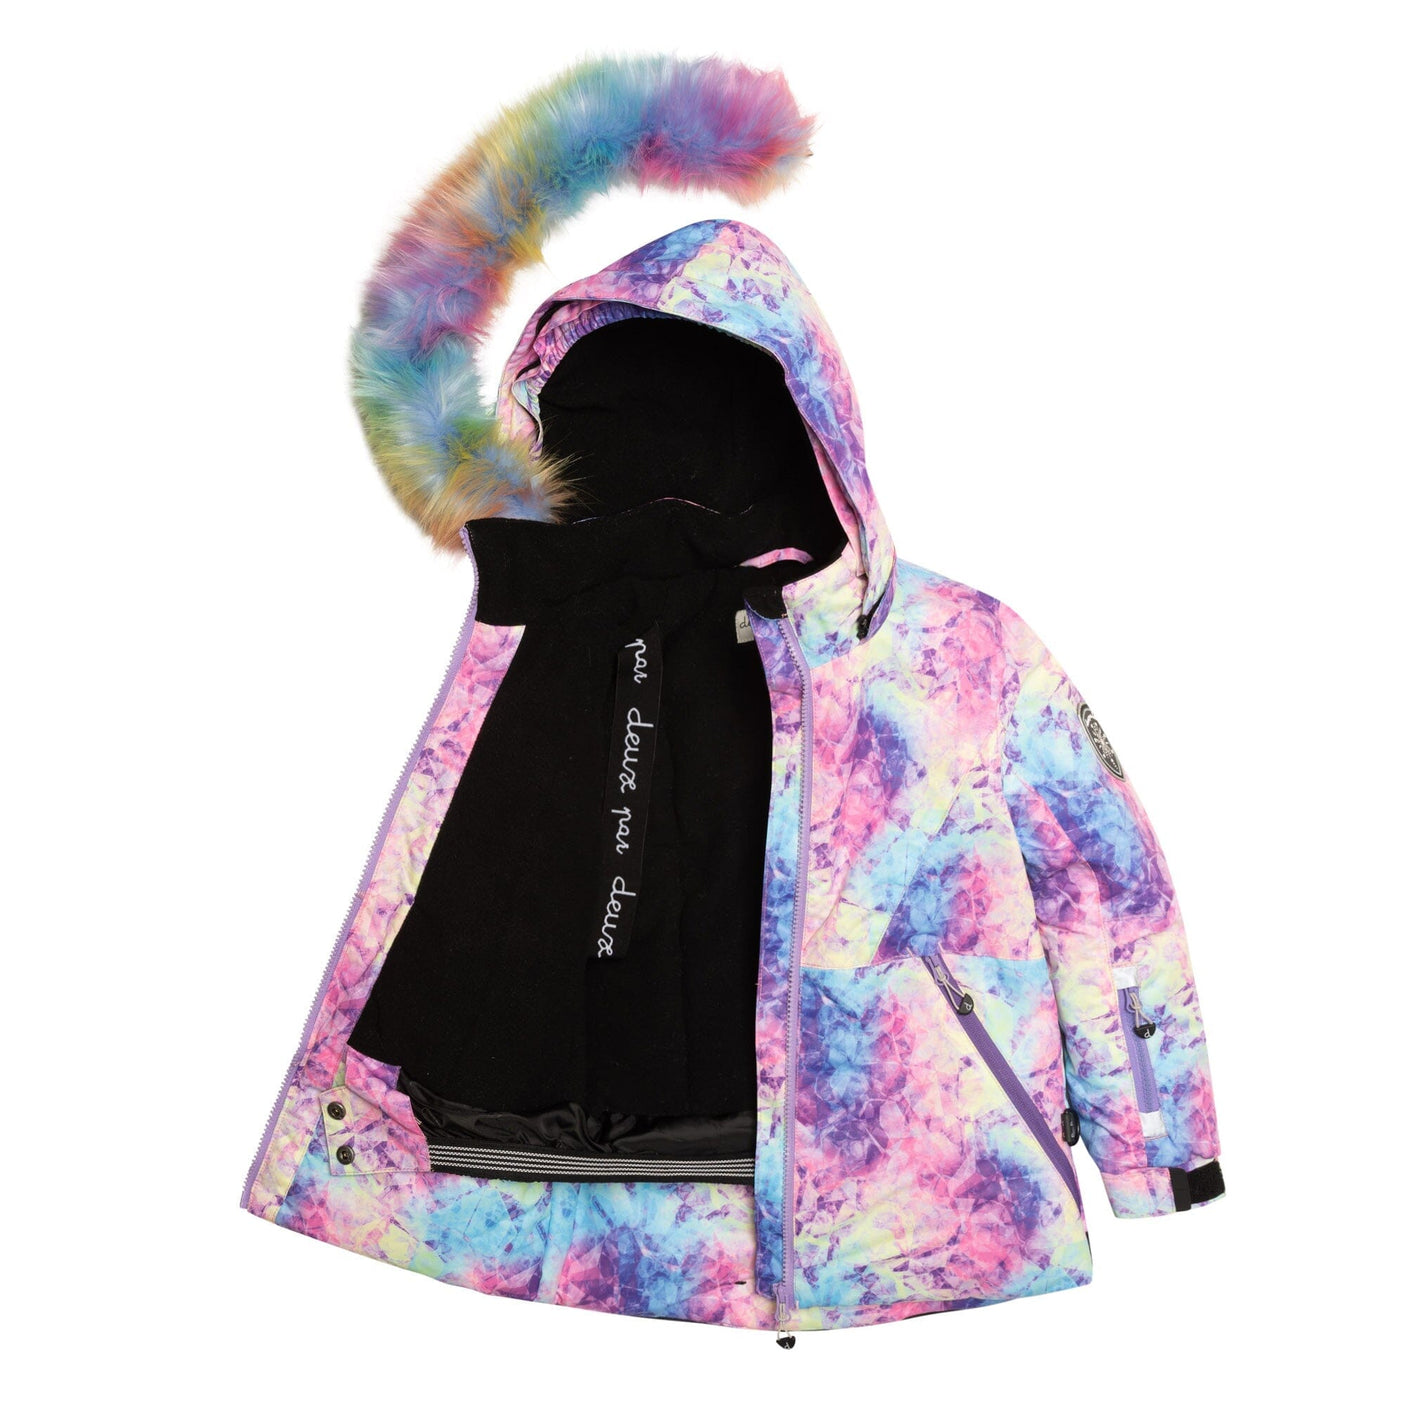 Two Piece Snowsuit Lavender With Frosted Rainbow Print-3